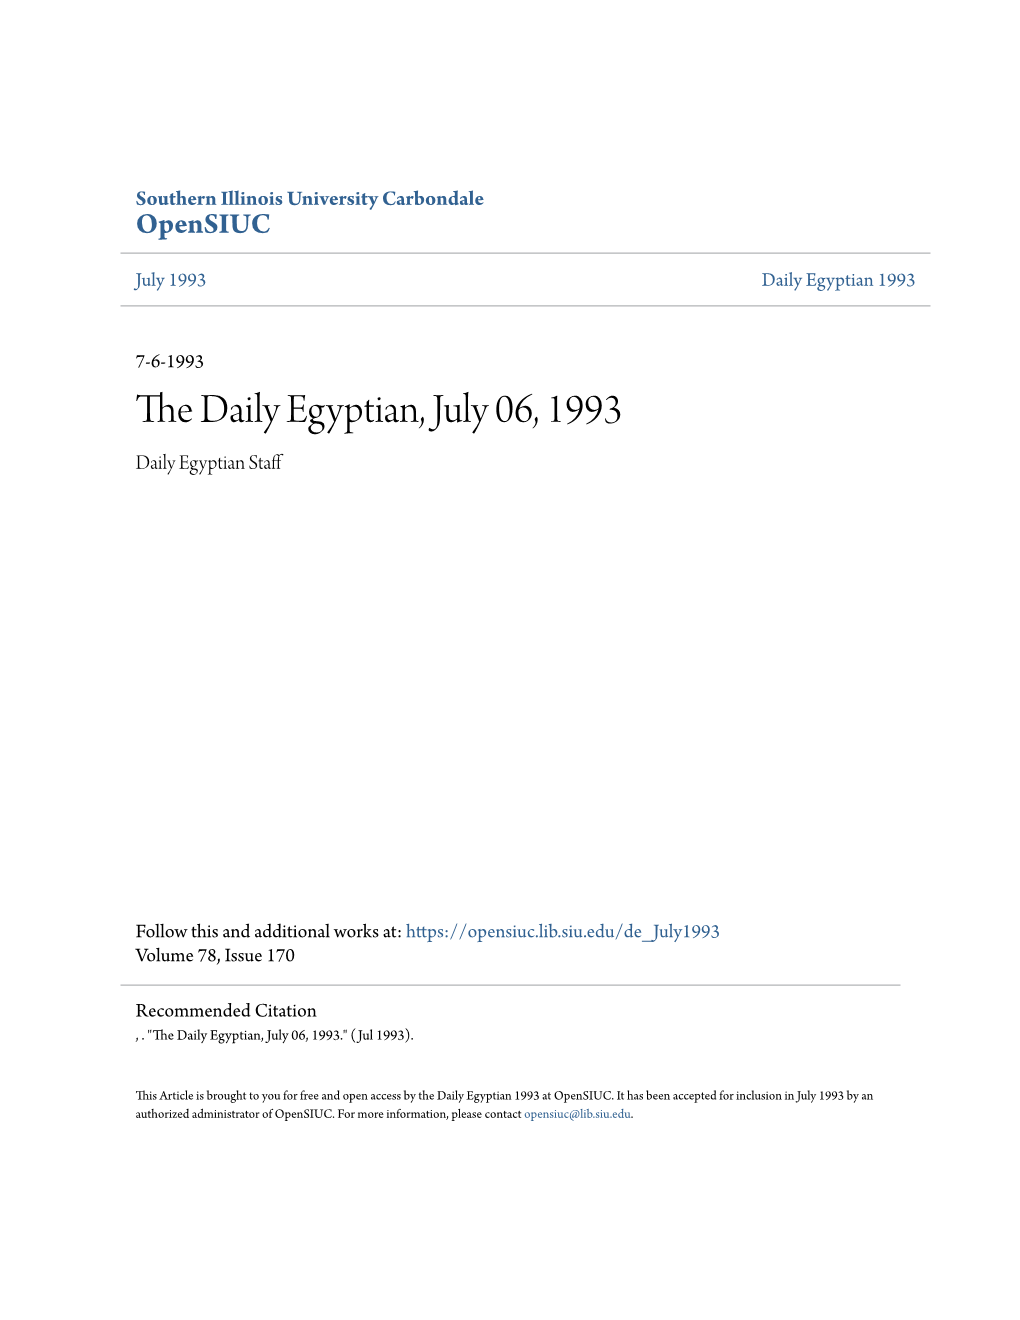 The Daily Egyptian, July 06, 1993